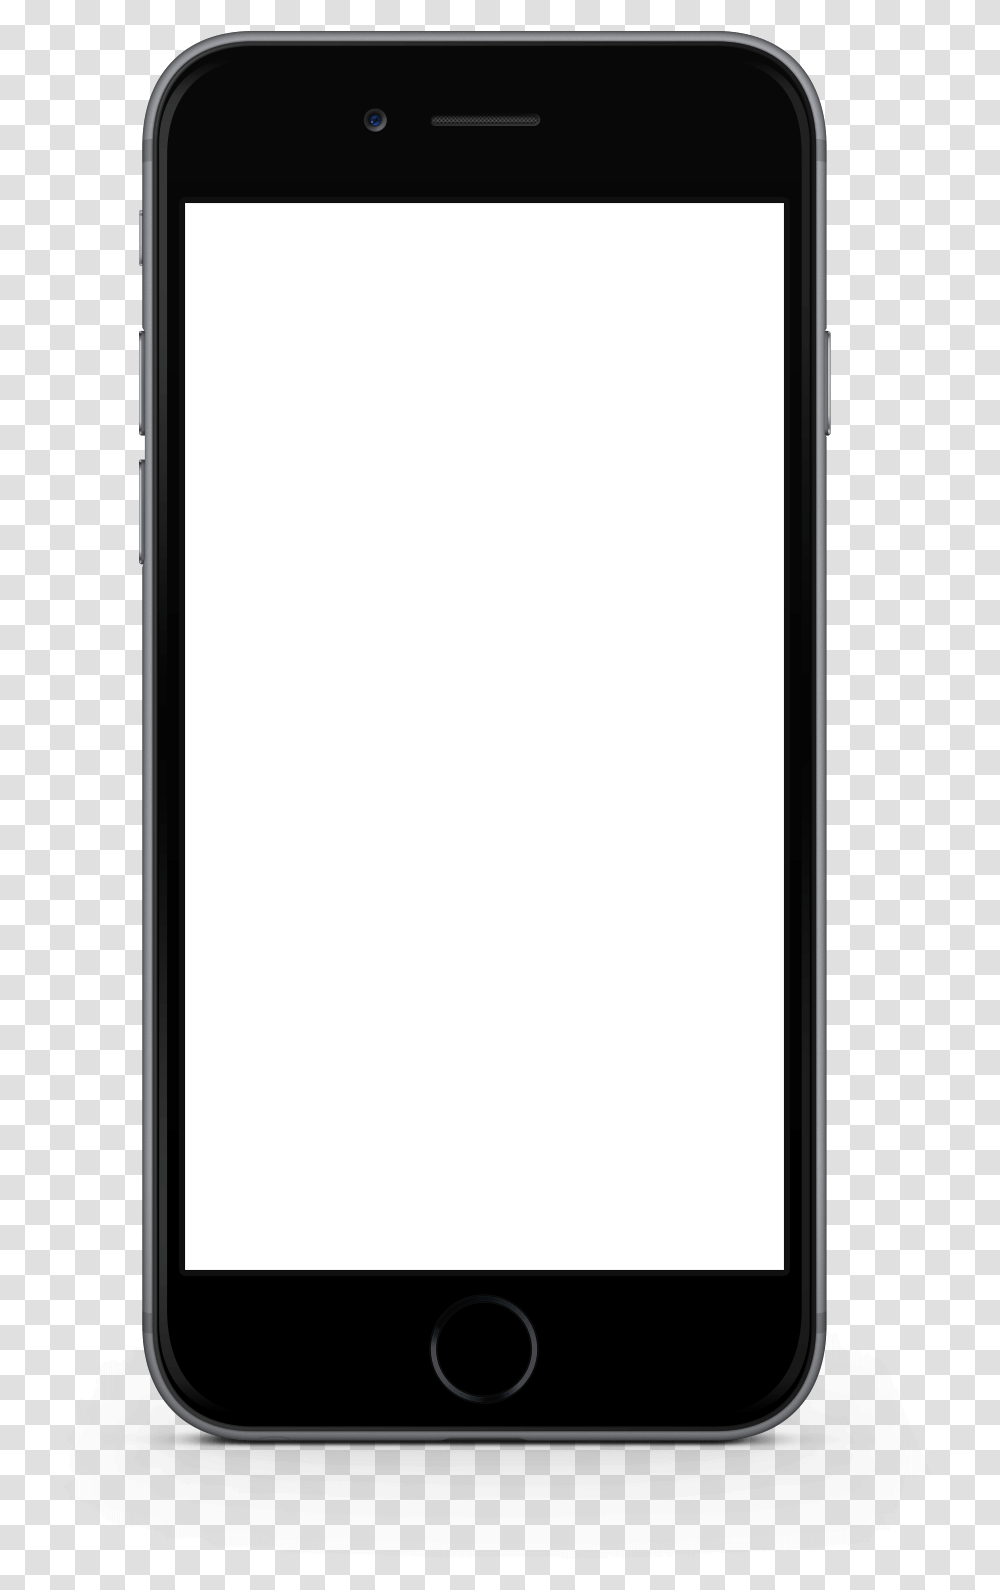 Iphone Frame Ios 11 Search Bar, Electronics, Mobile Phone, Cell Phone Transparent Png